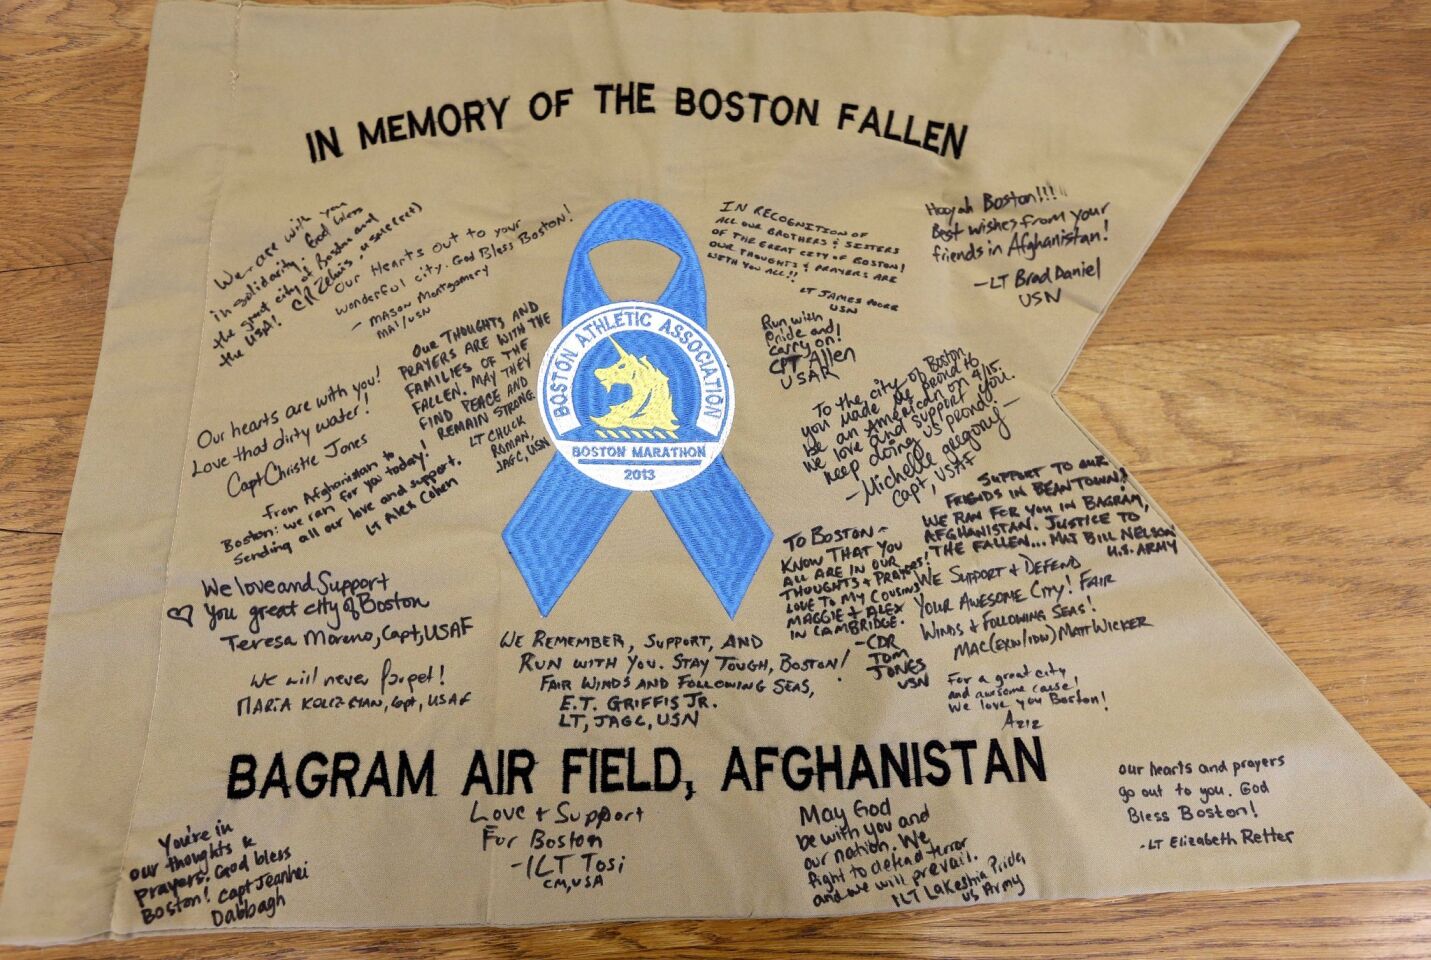 A banner featuring messages of support and condolence from members of the armed services at Bagram air base, in Afghanistan, was part of the original memorial to bombing victims near the finish of the 2013 Boston Marathon.